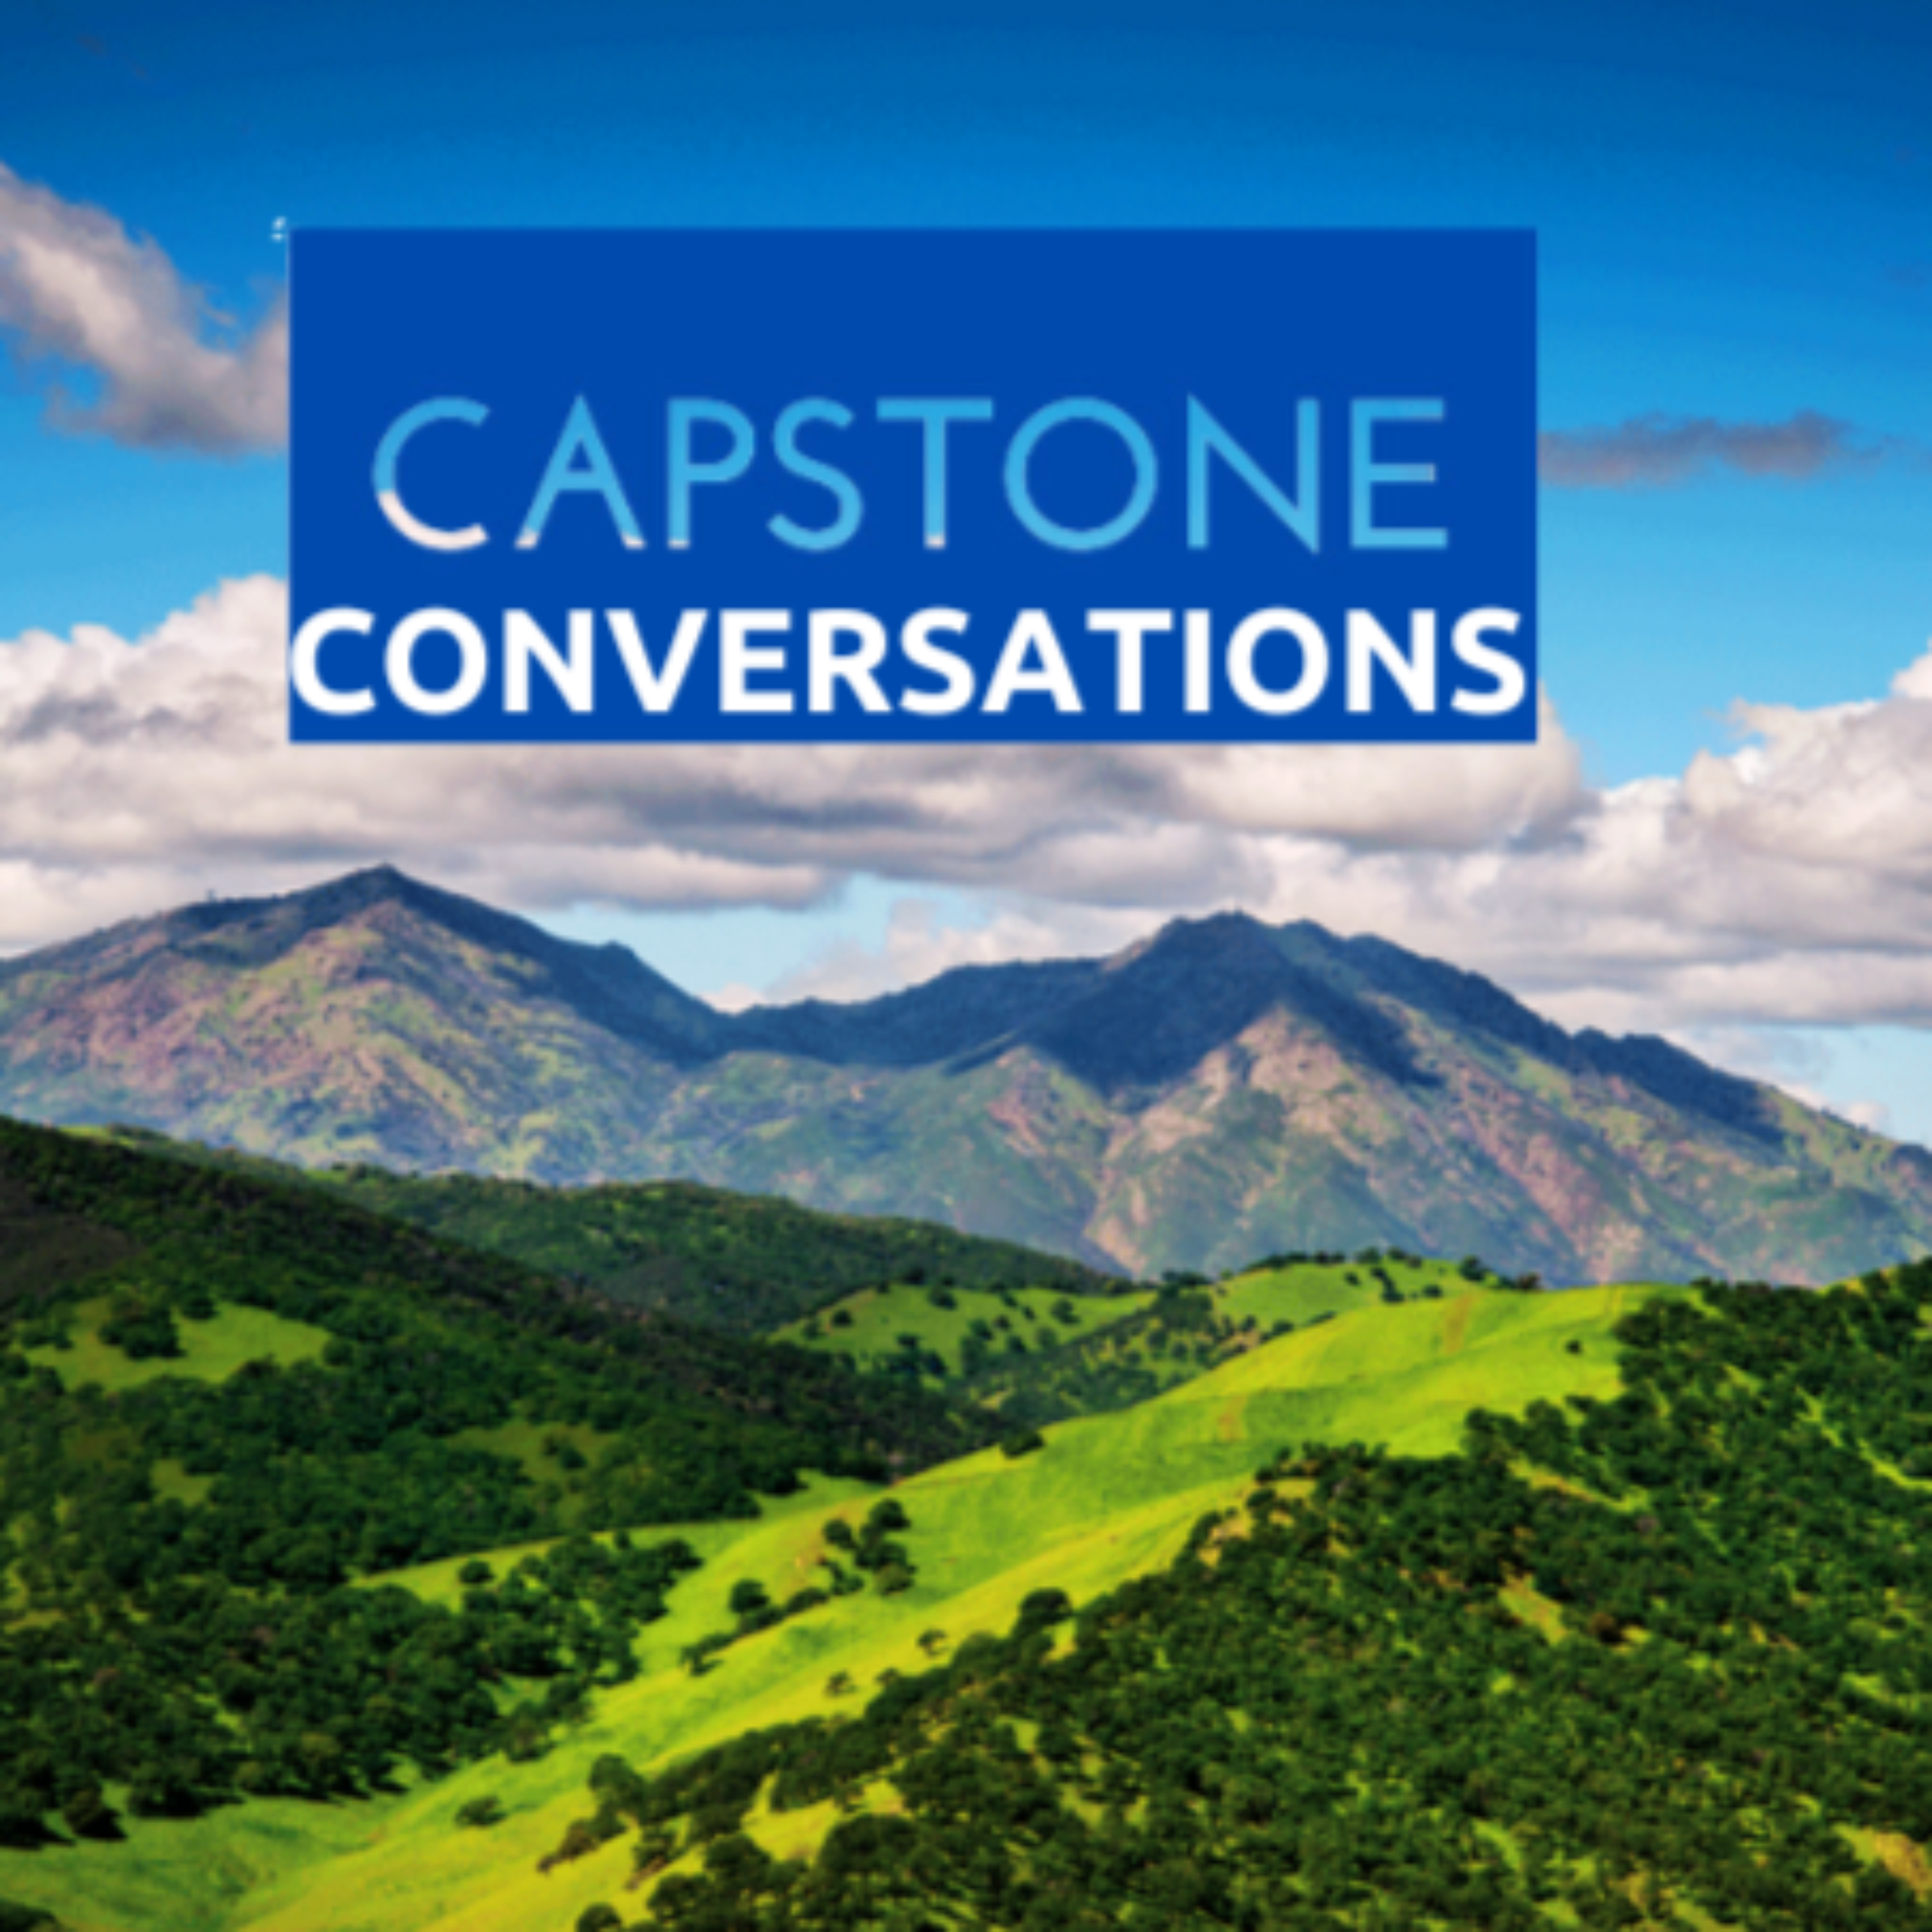 Welcome to the Capstone Conversation!